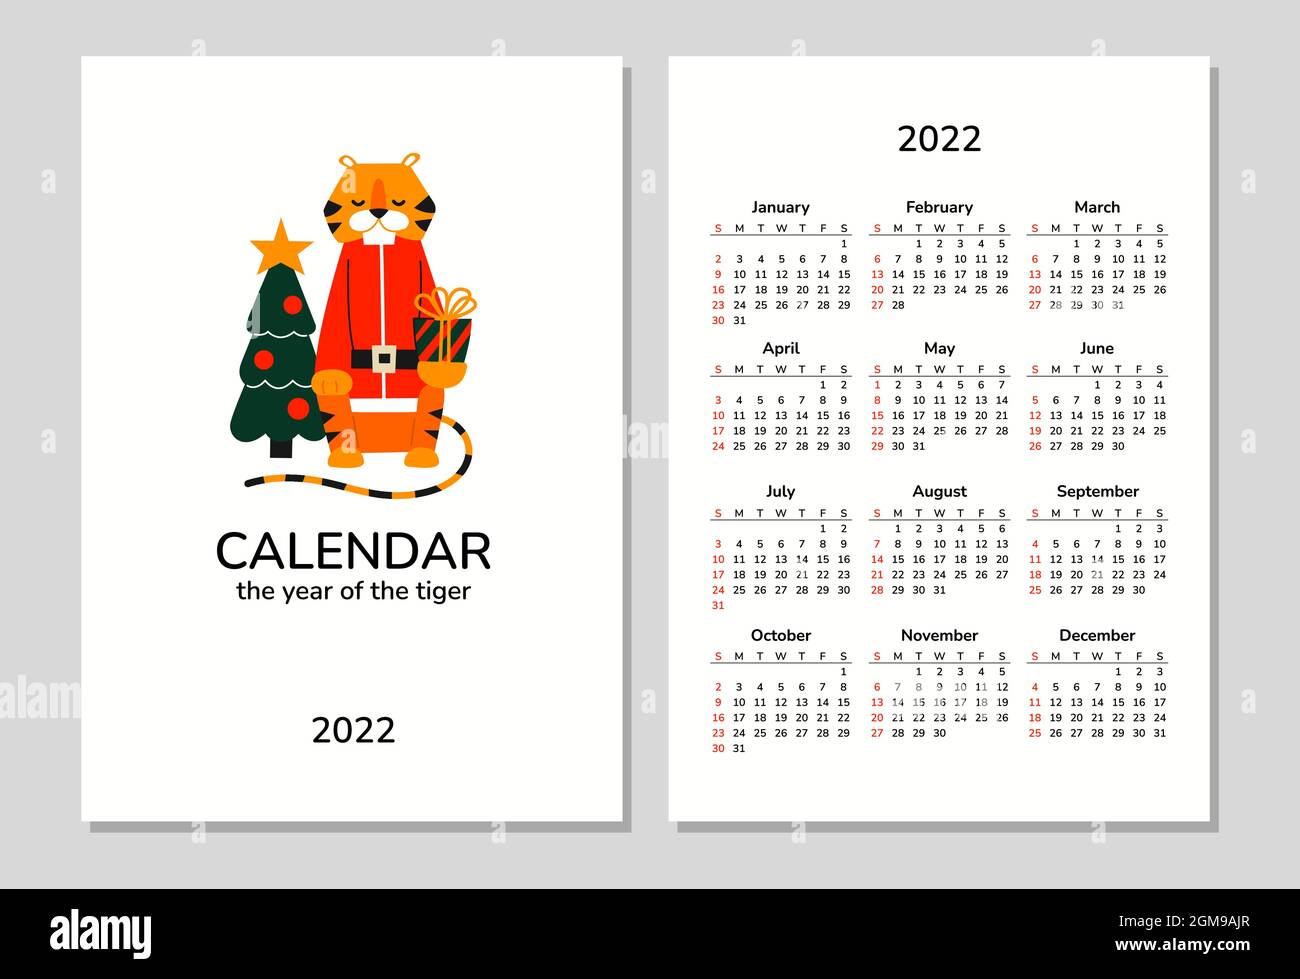 The Christmas Calendar 2022 Calendar For 2022 With A Cute Tiger. Merry Christmas And Happy New Year.  Vector Isolated Illustration Of Tiger With Christmas Tree And Presents.  Santa Stock Vector Image & Art - Alamy